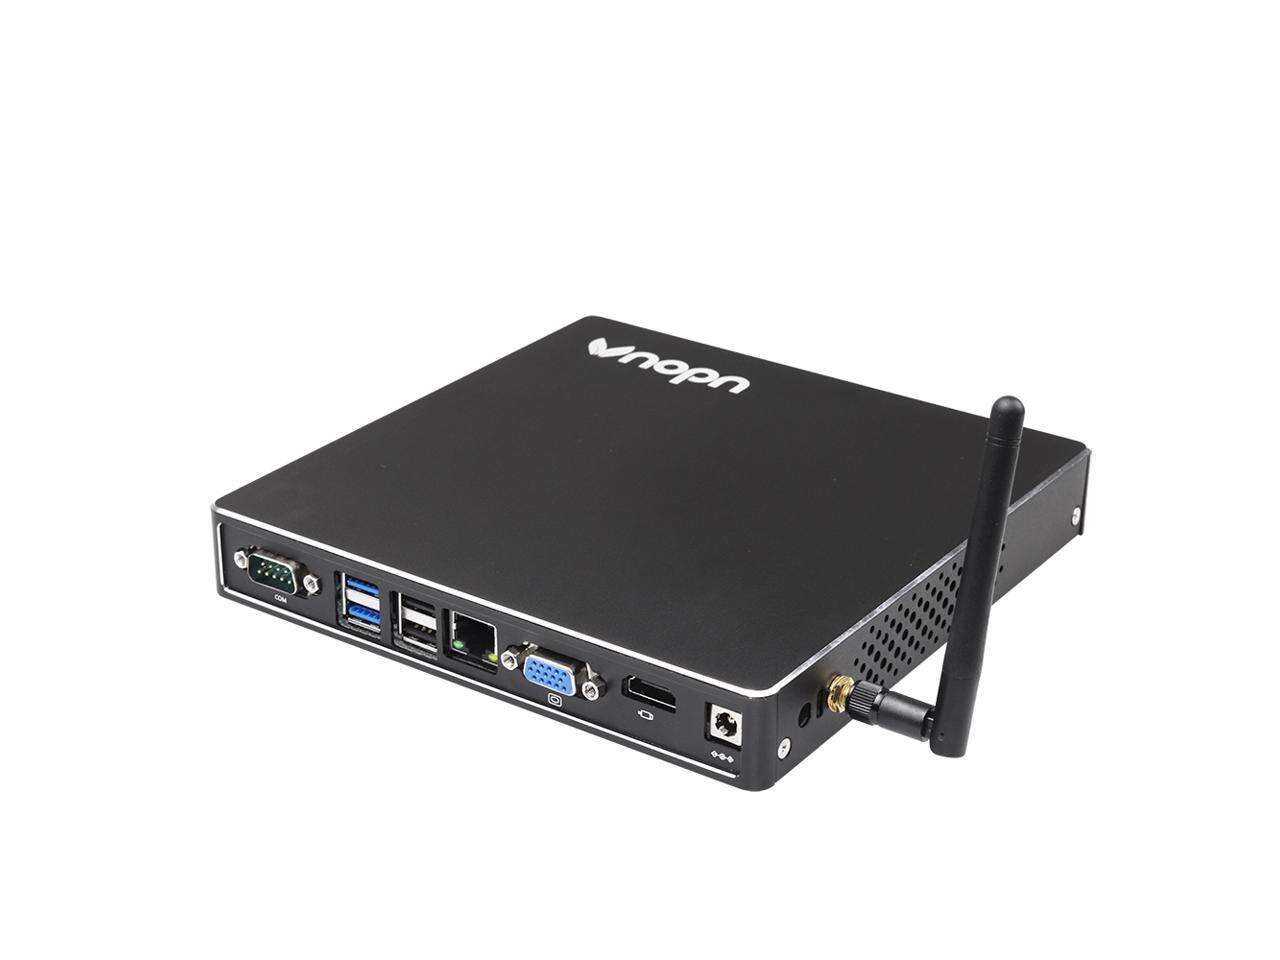 Mini PC Fanless Industrial Office Computer with AMD LX-420 Quad Core USB3.0 WiFi LAN SSD Support Linux Windows 7/8/10